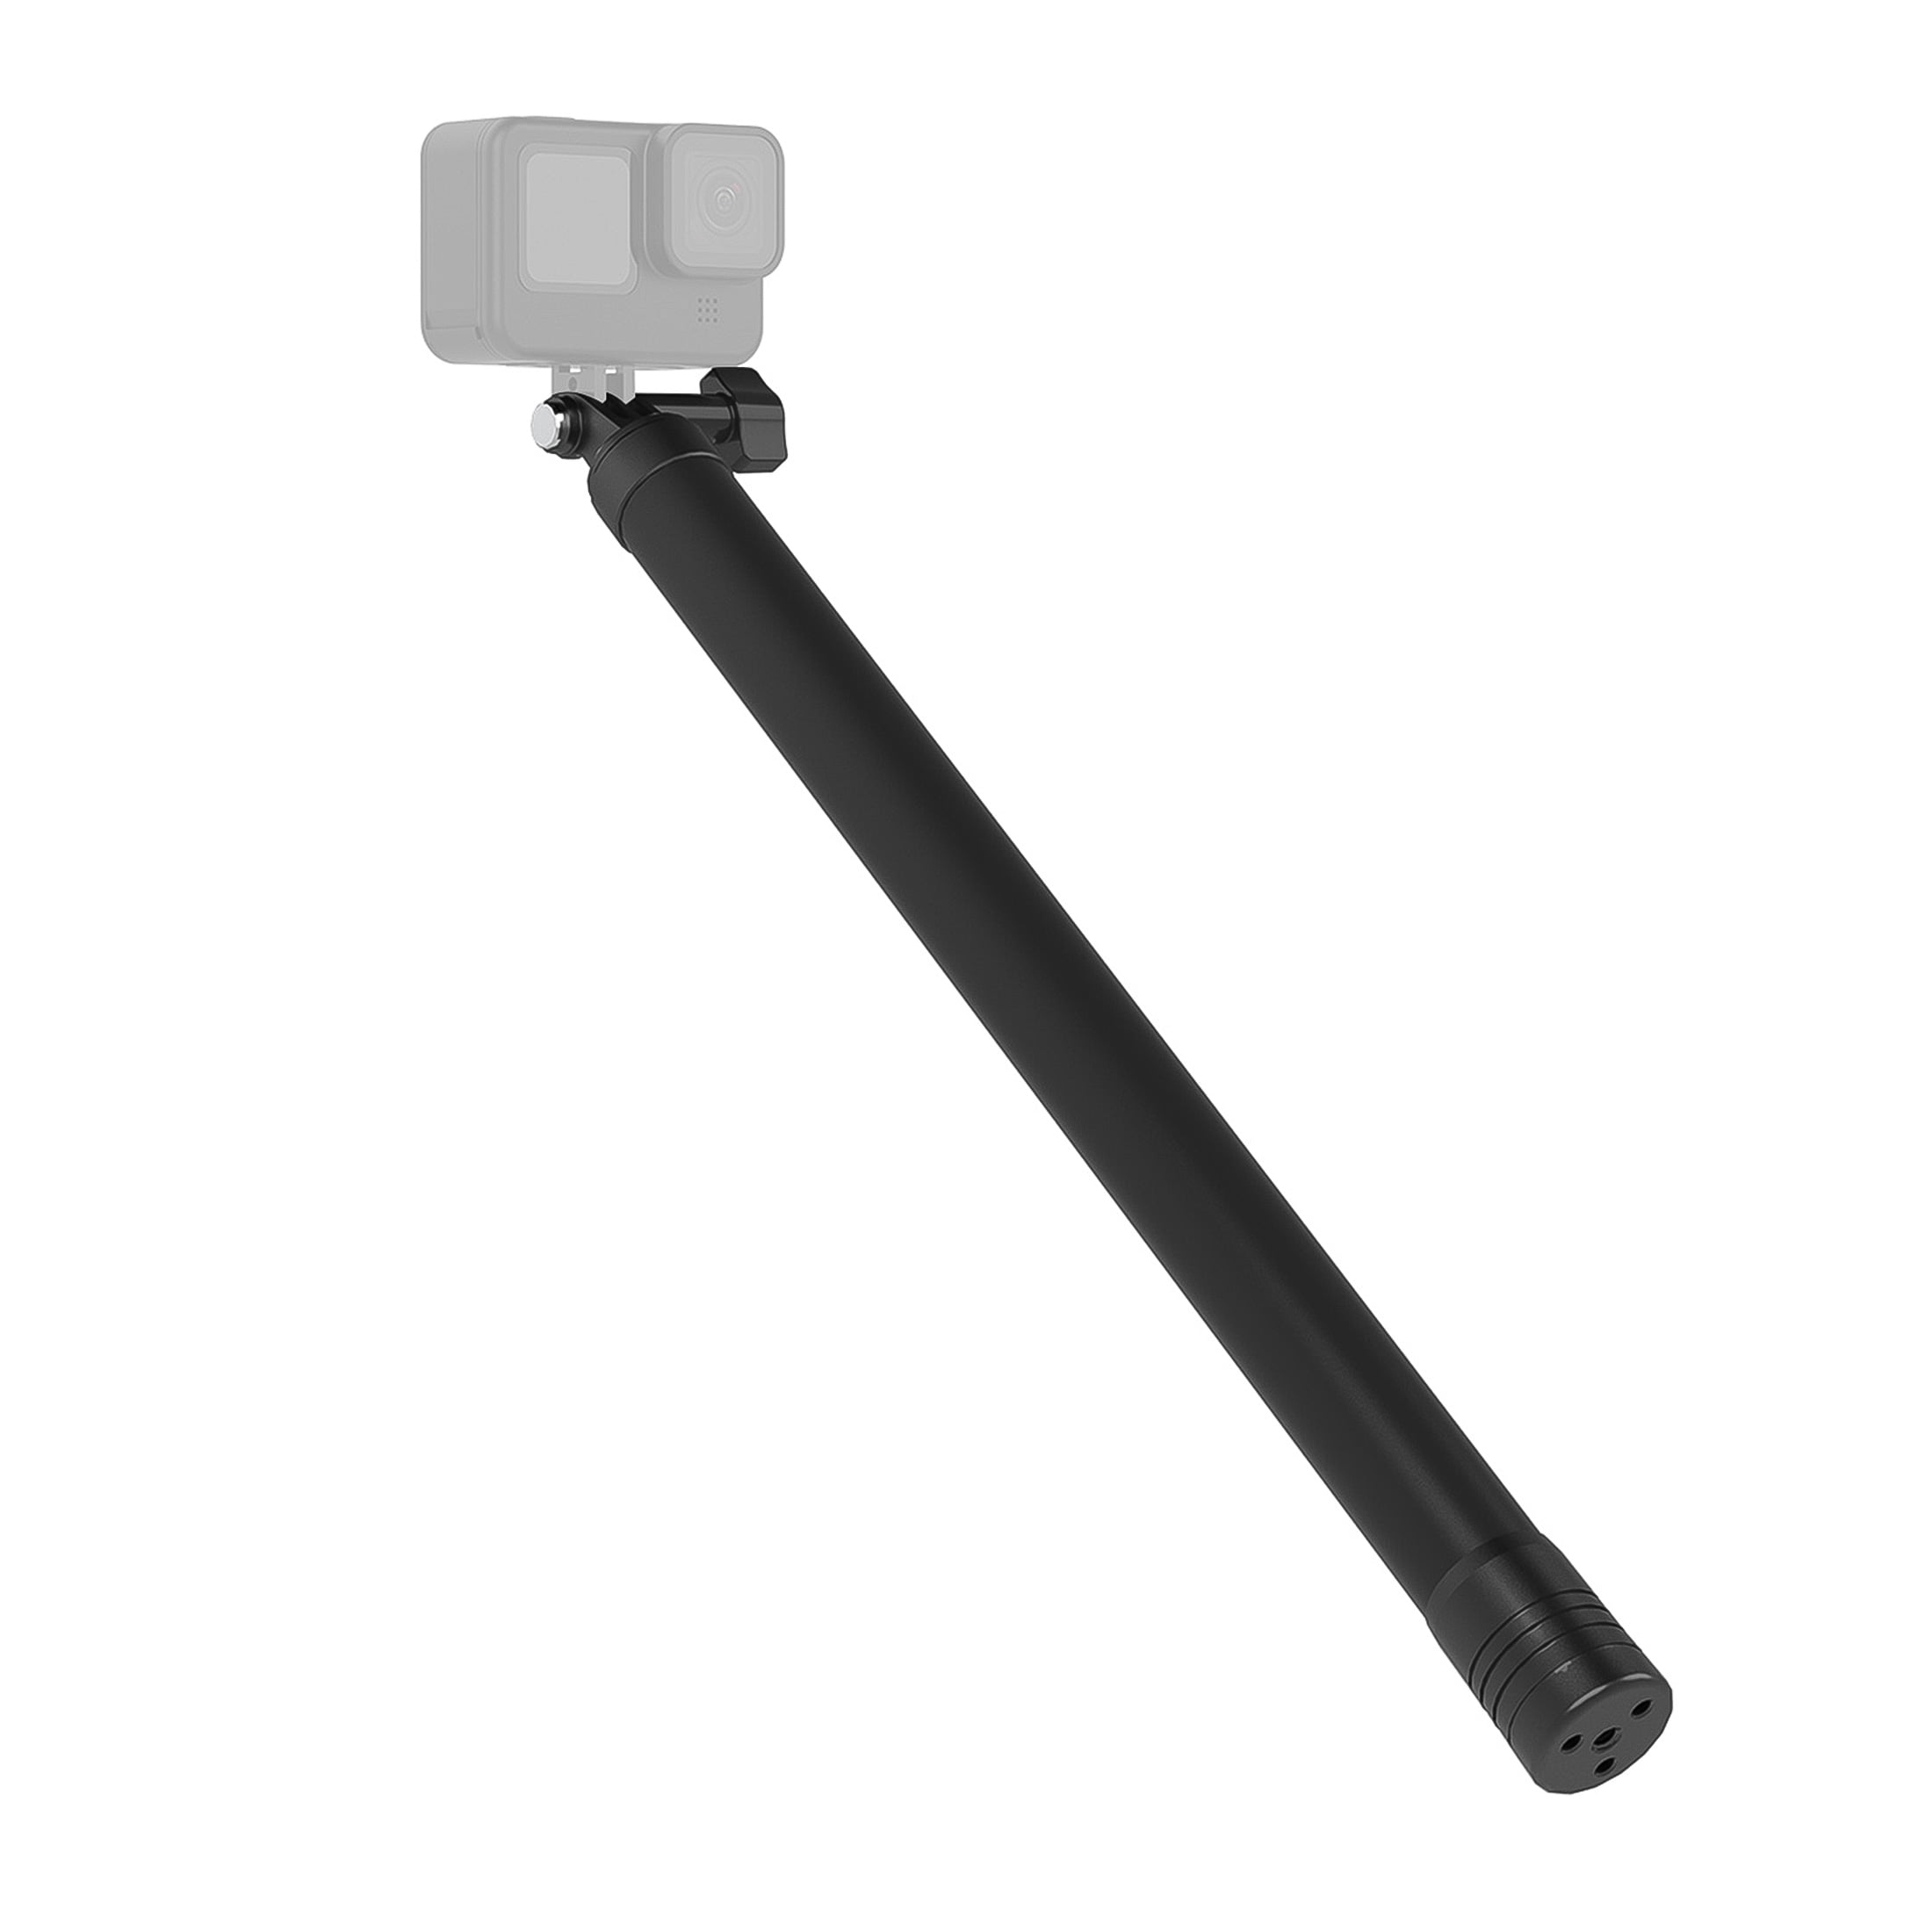 IS-MNP-300 Sports Camera Selfie Stick 3 Inches Ultra Action Camera Vlog Bracket Carbon Fiber Replacement for GoPro Hero 9/8/7/6, One Osmo Action - Walmart.com